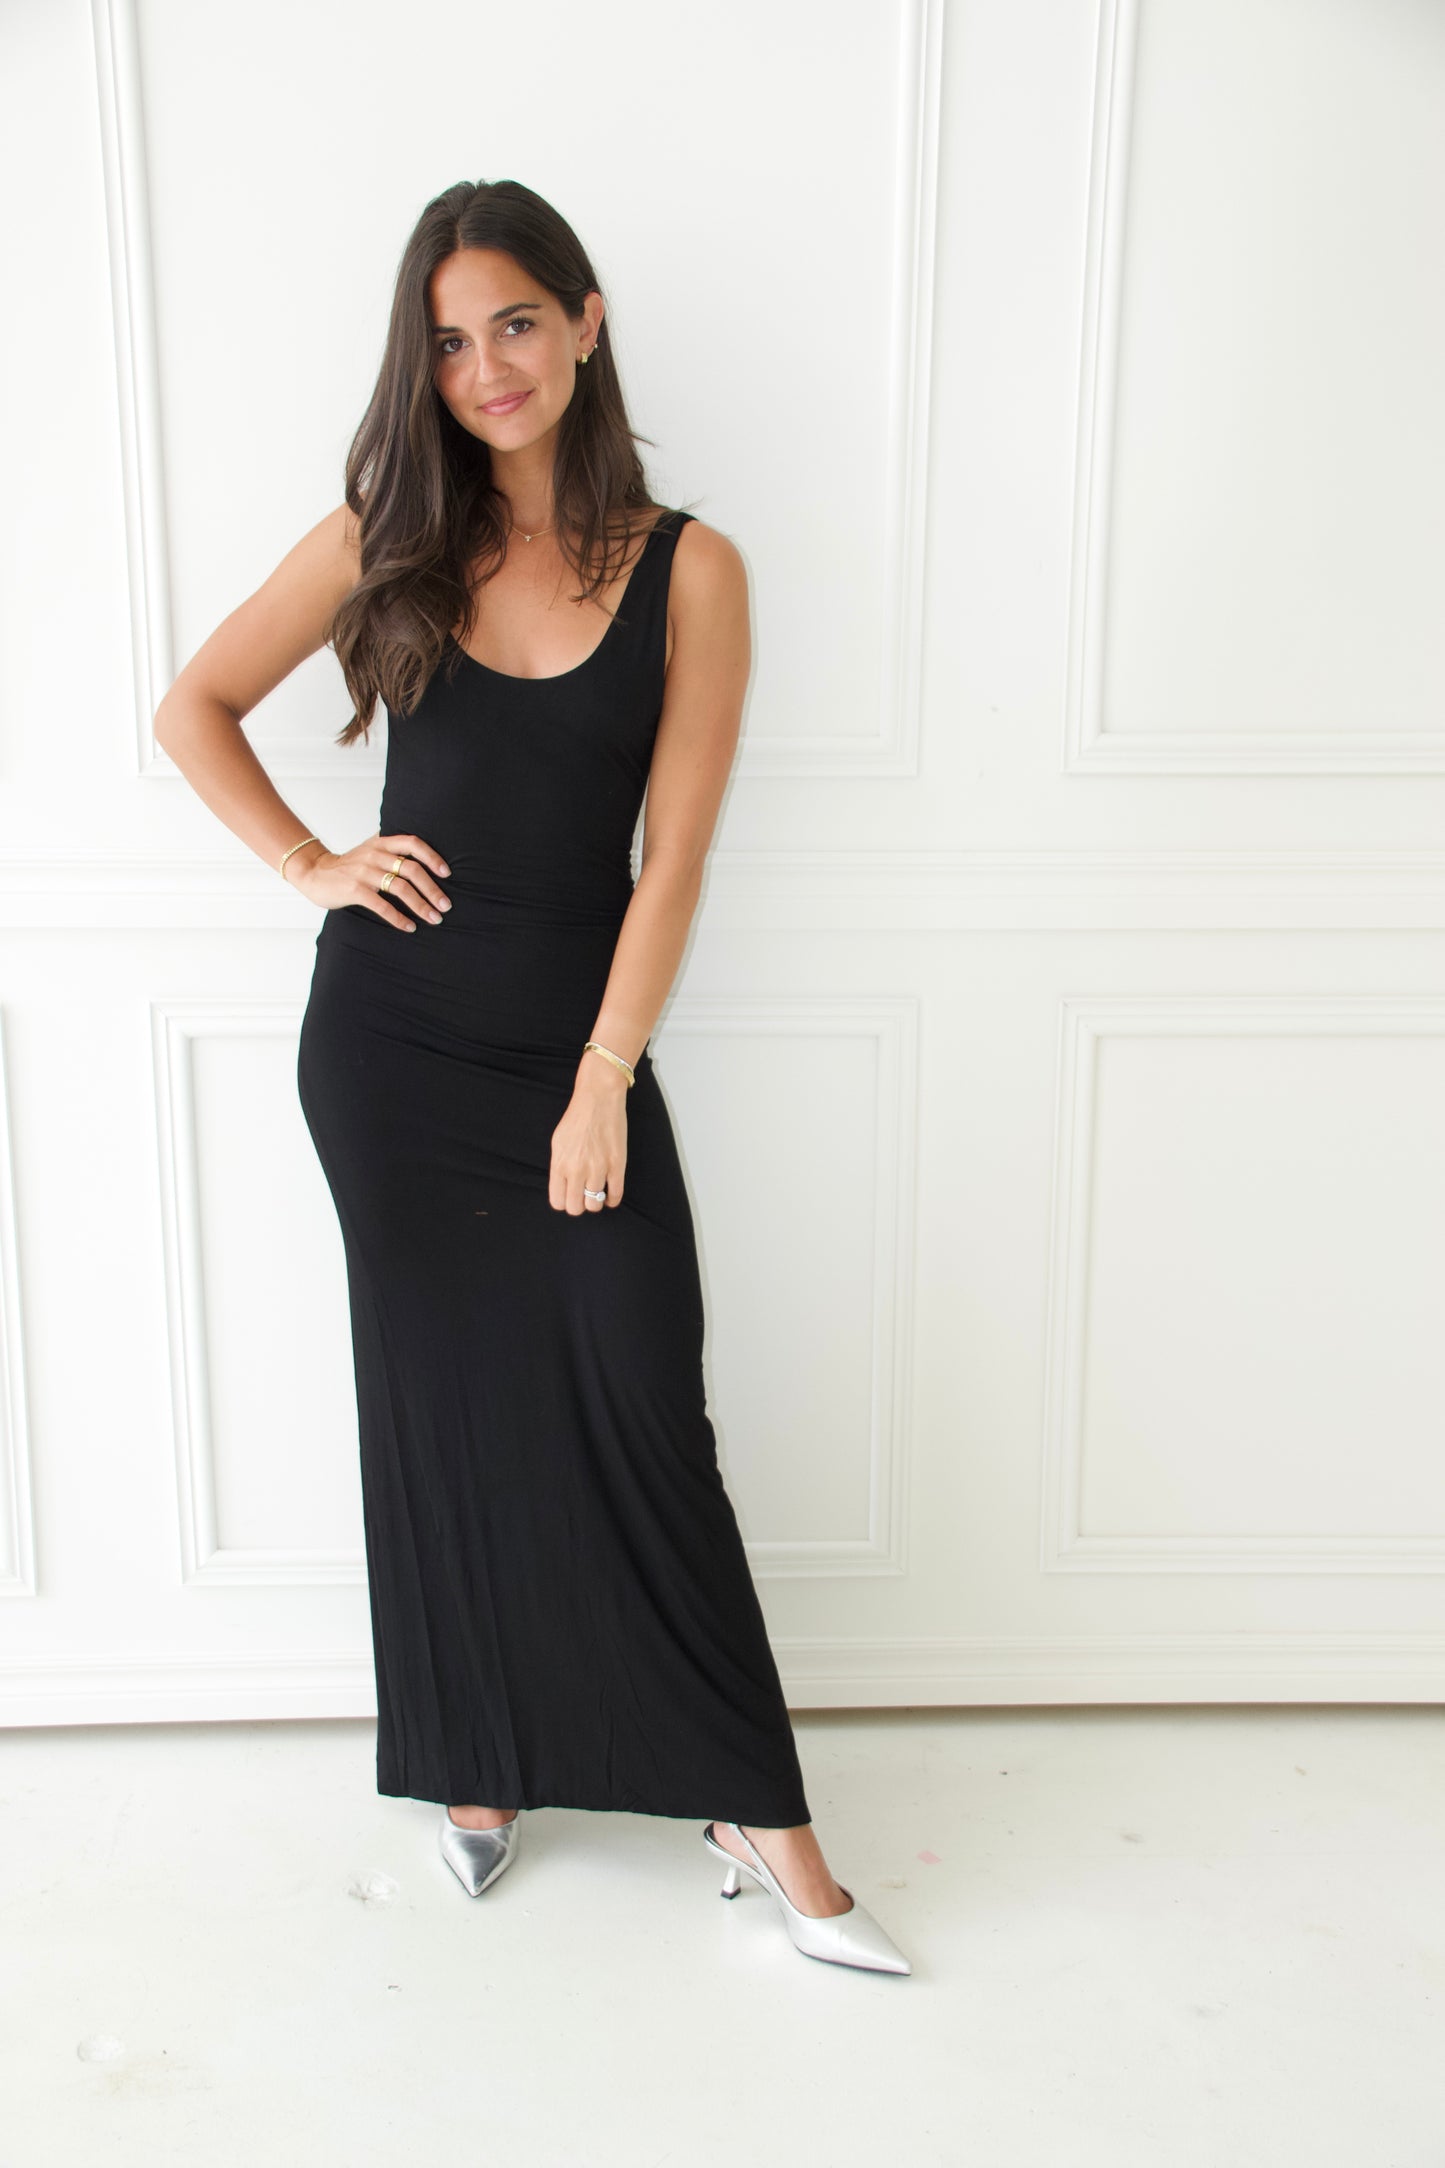 The Knotted Backless Dress